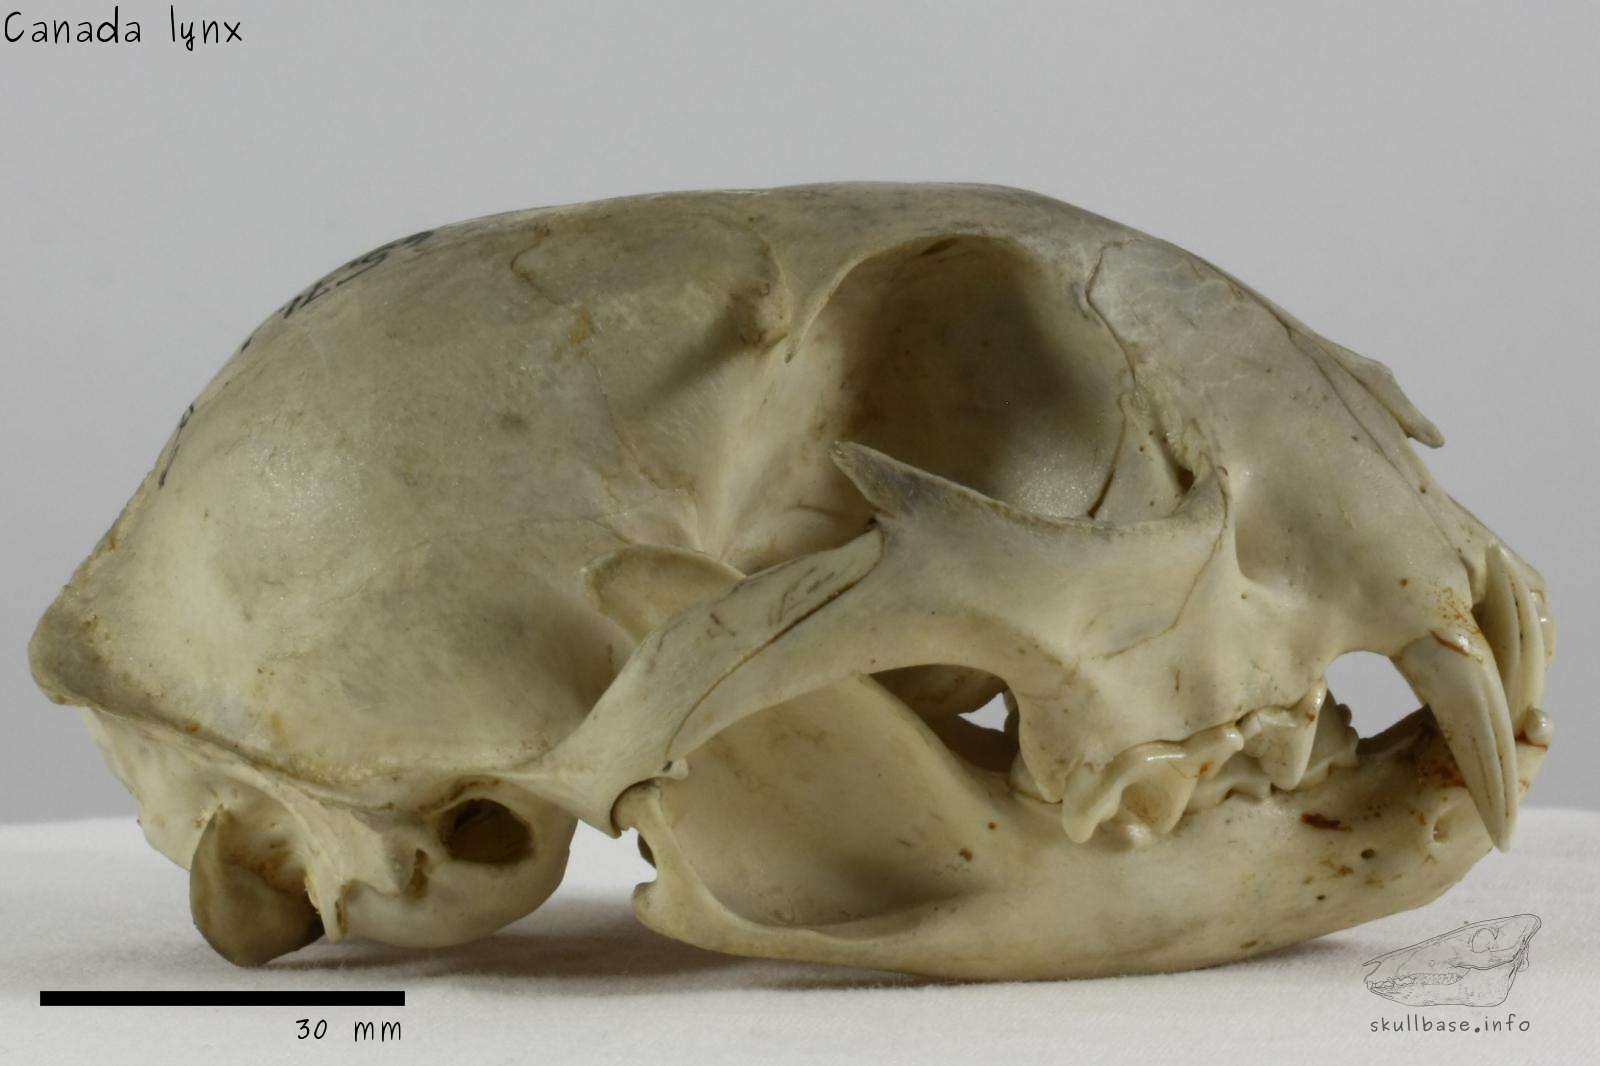 Canada lynx (Lynx canadensis canadensis) skull lateral view